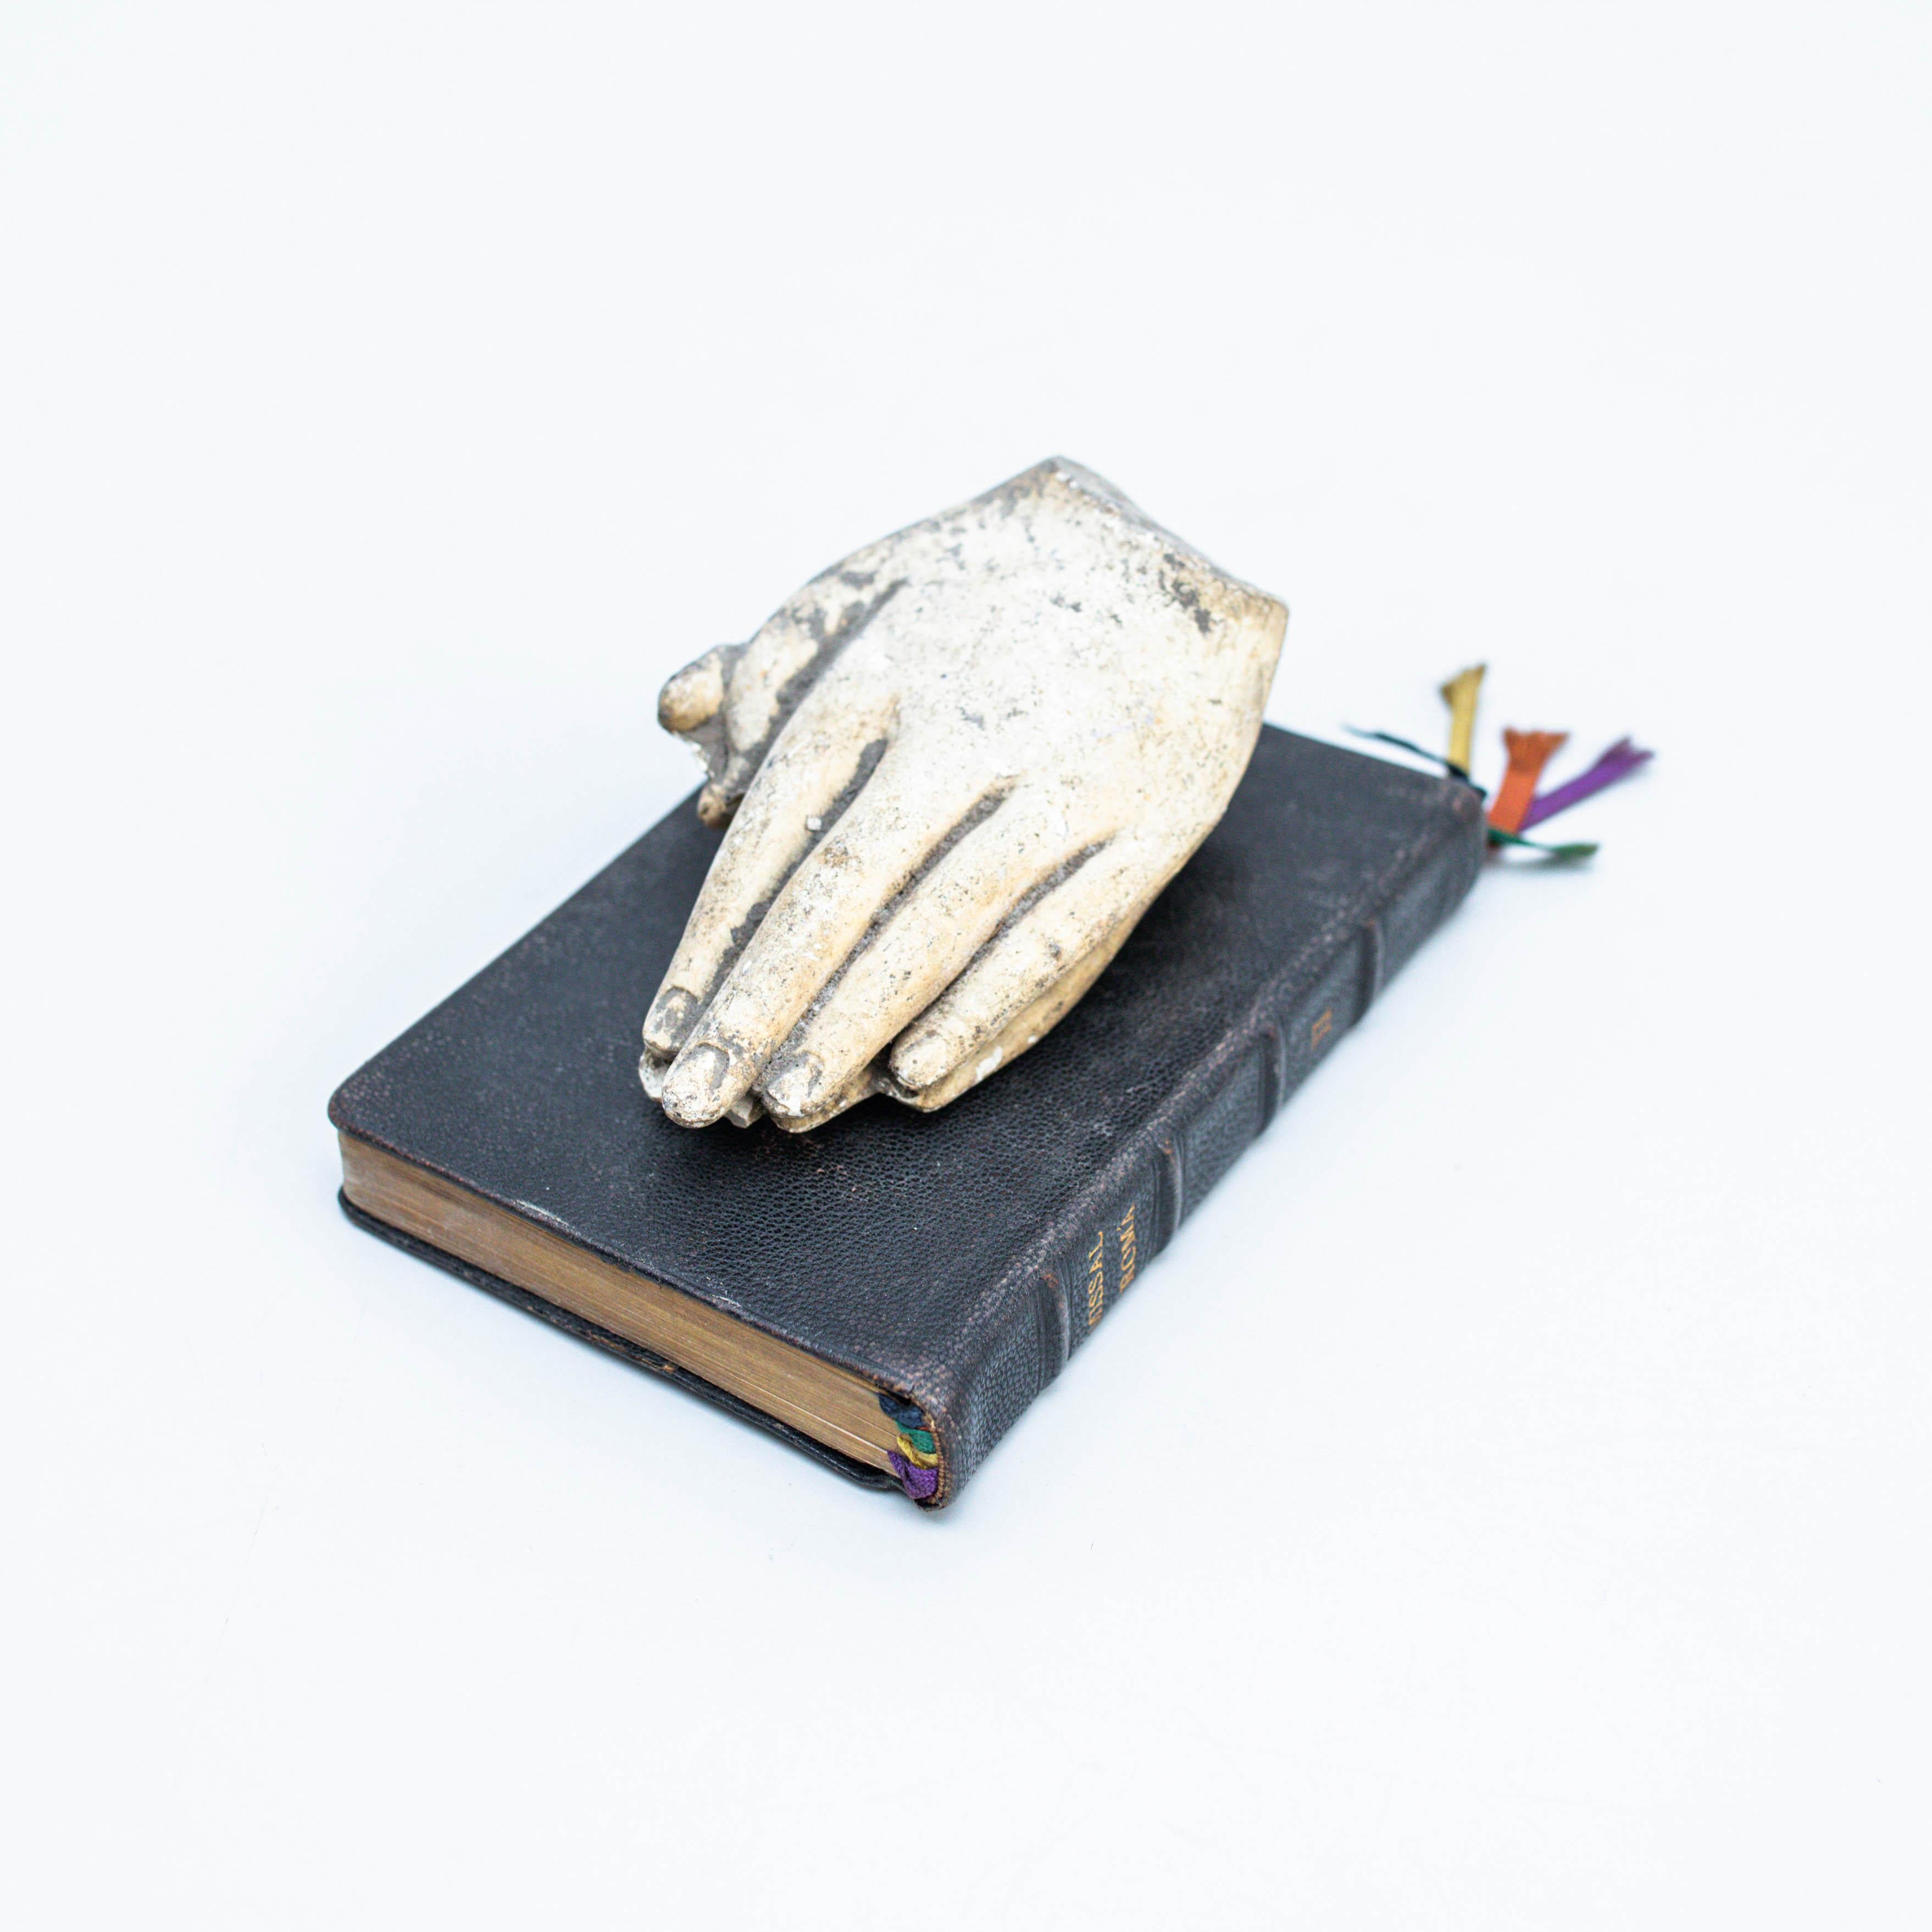 Spanish Artwork with Old Book and Mysterious Praying Hands, Circa 1990 For Sale